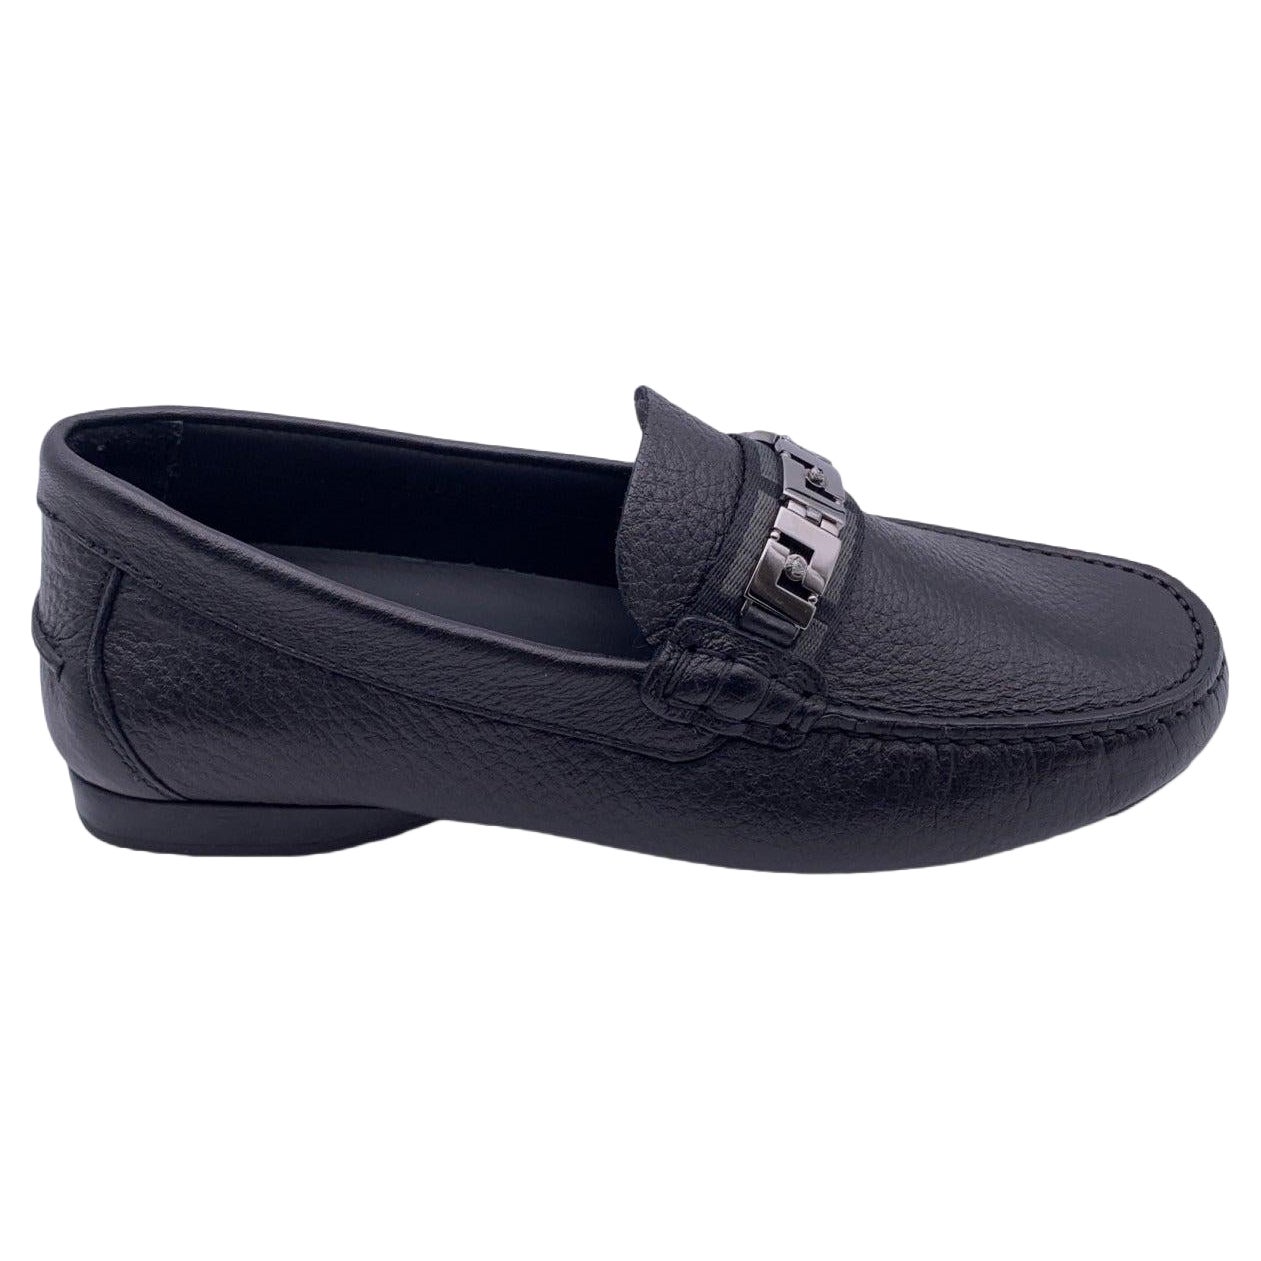 Versace Black Leather Mocassins Loafers Car Flat Shoes Size 38.5 For Sale